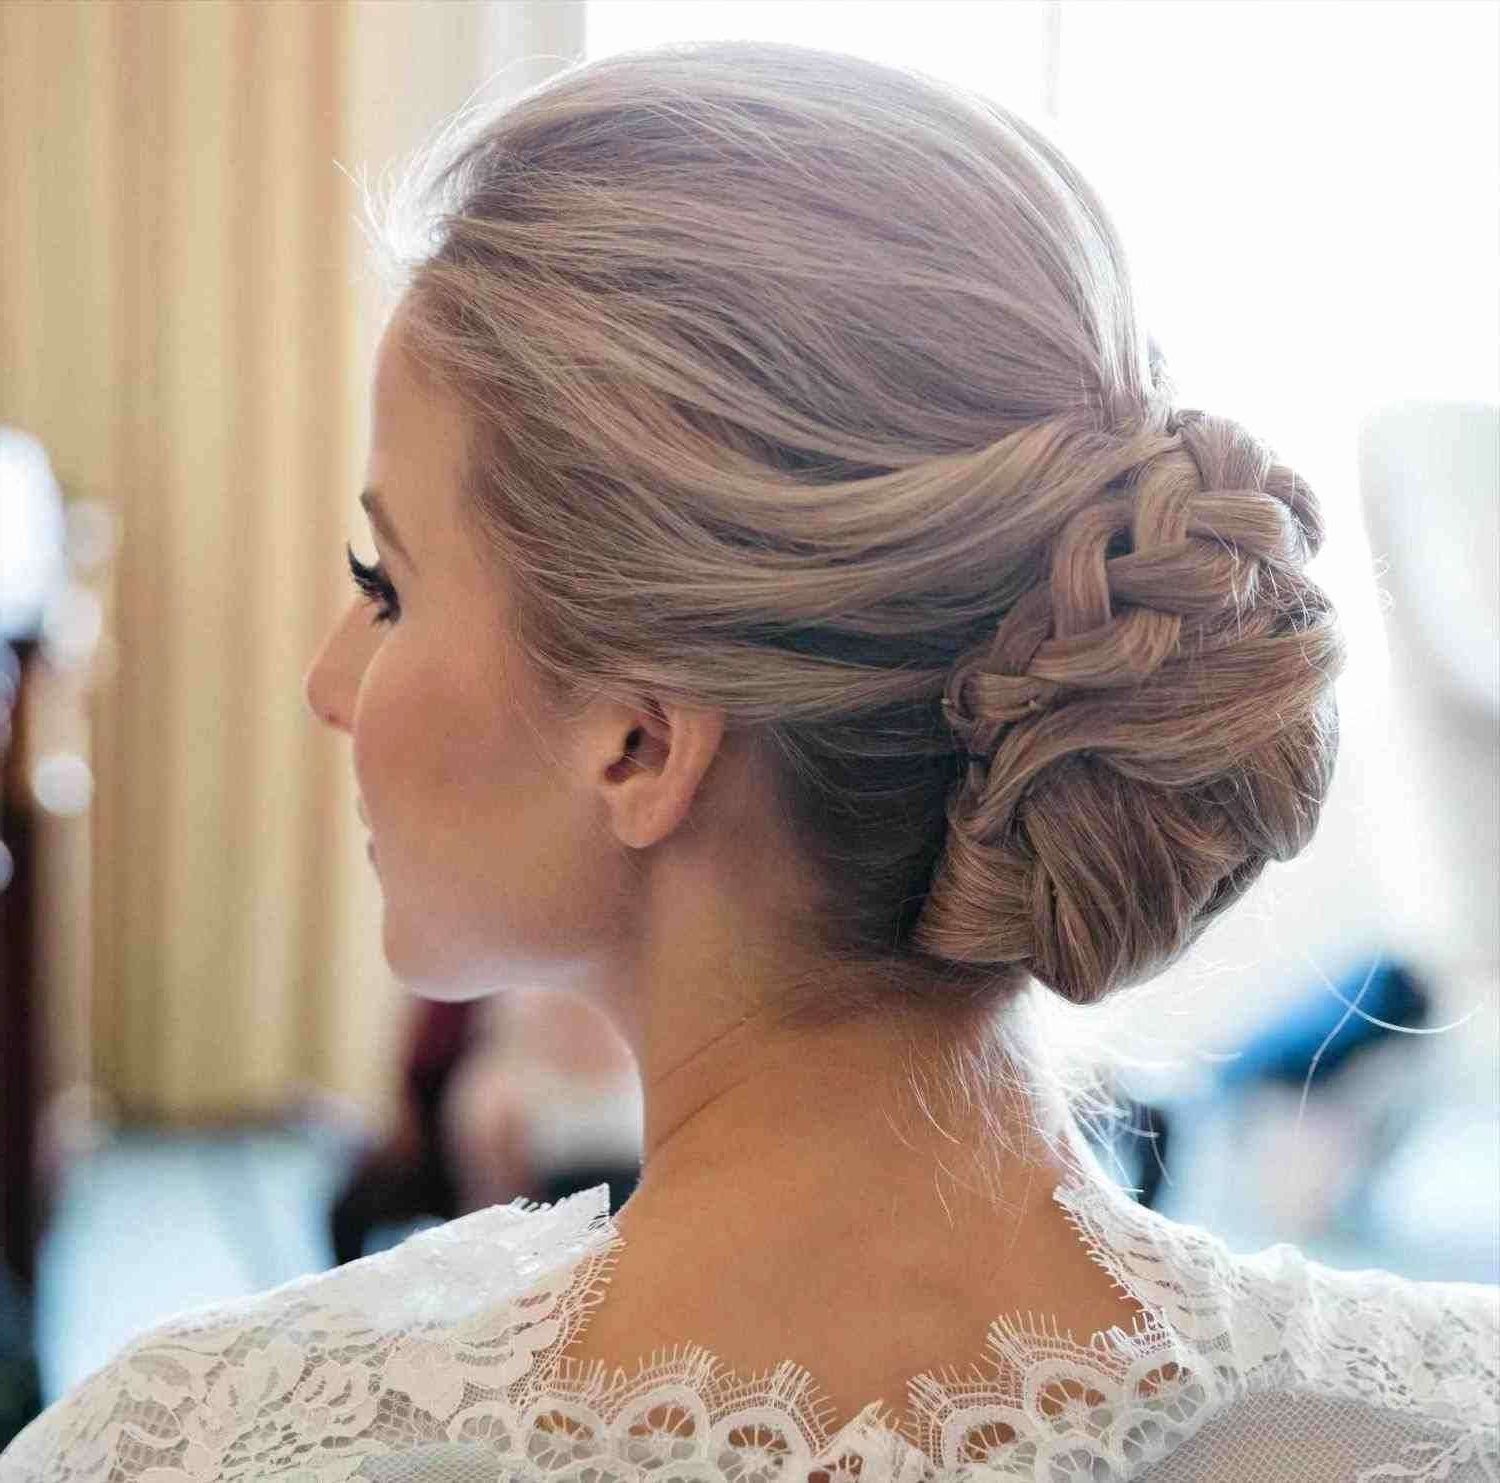 Traditional Wedding Guest Hairstyles Wedding Guest Hairstyles Medium Pertaining To Famous Wedding Guest Hairstyles For Medium Length Hair (View 10 of 15)